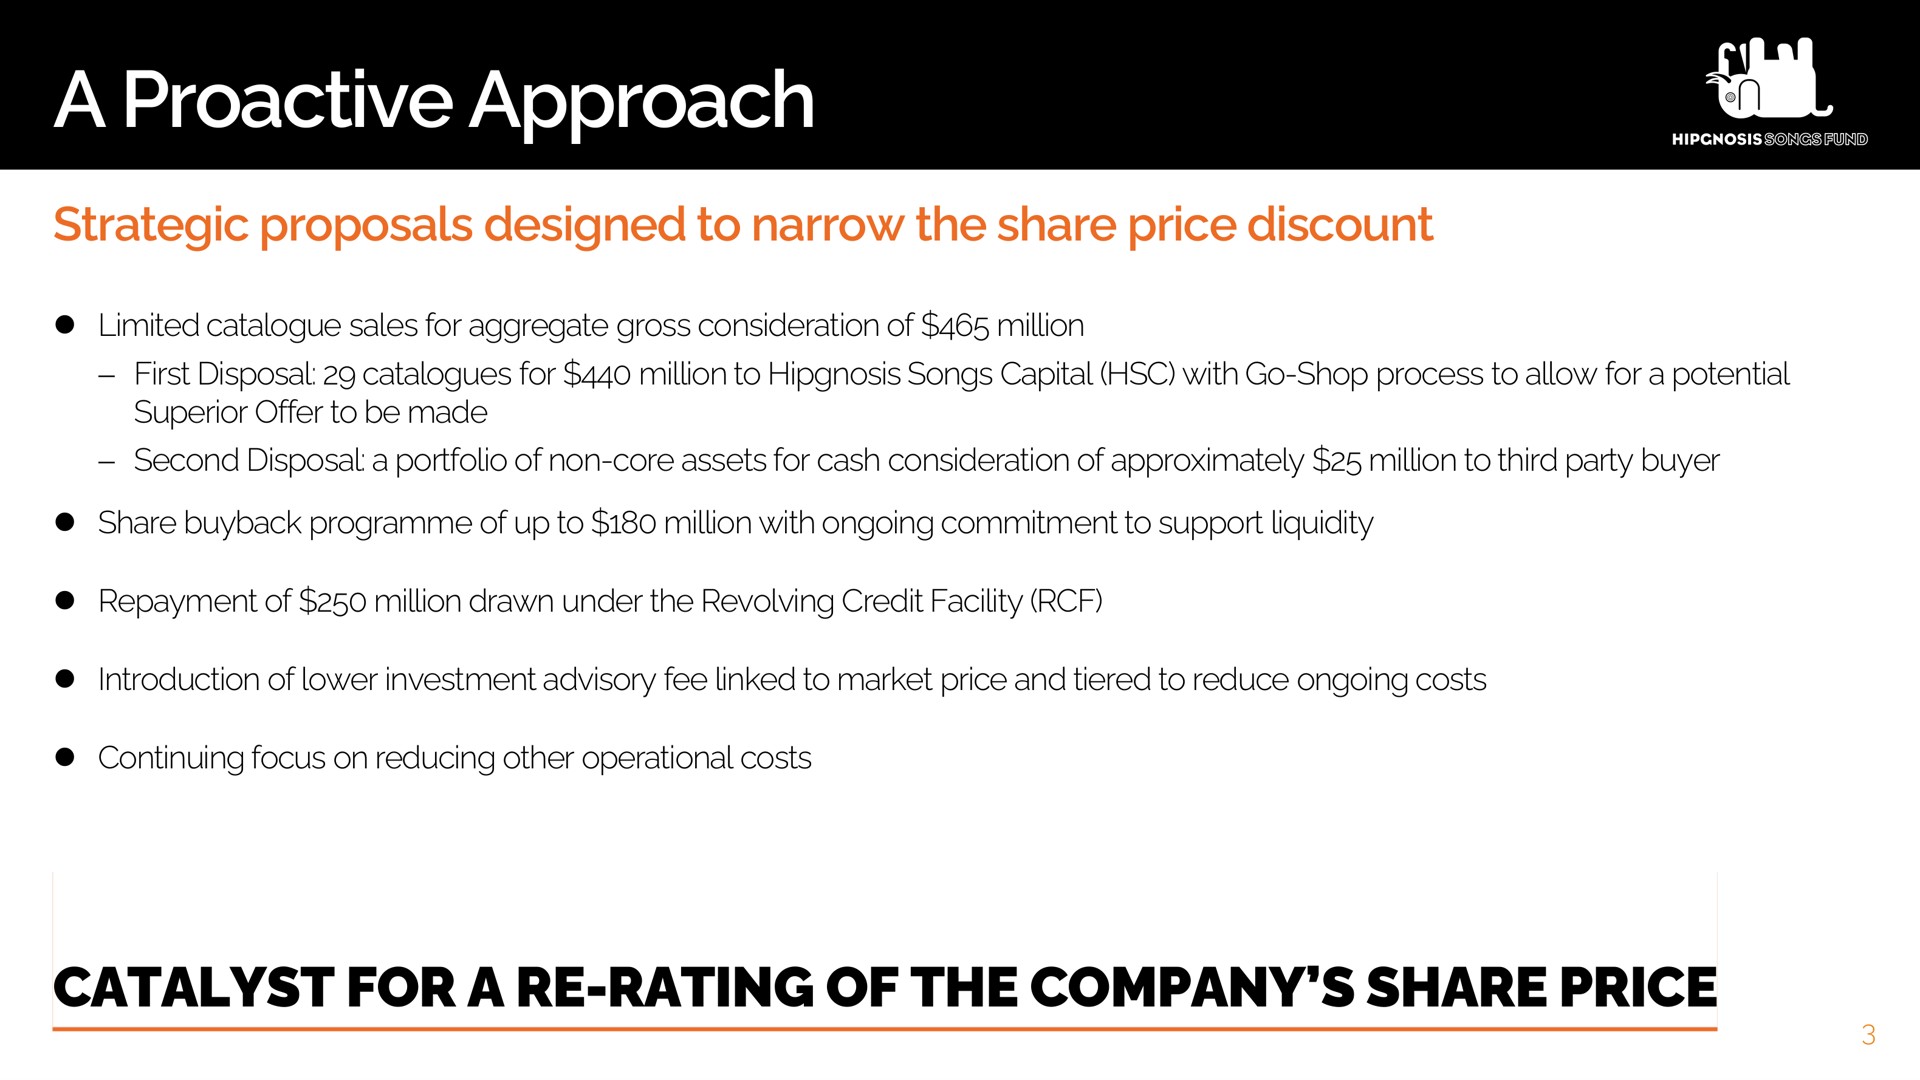 a approach catalyst for rating of the company share price | Hipgnosis Songs Fund